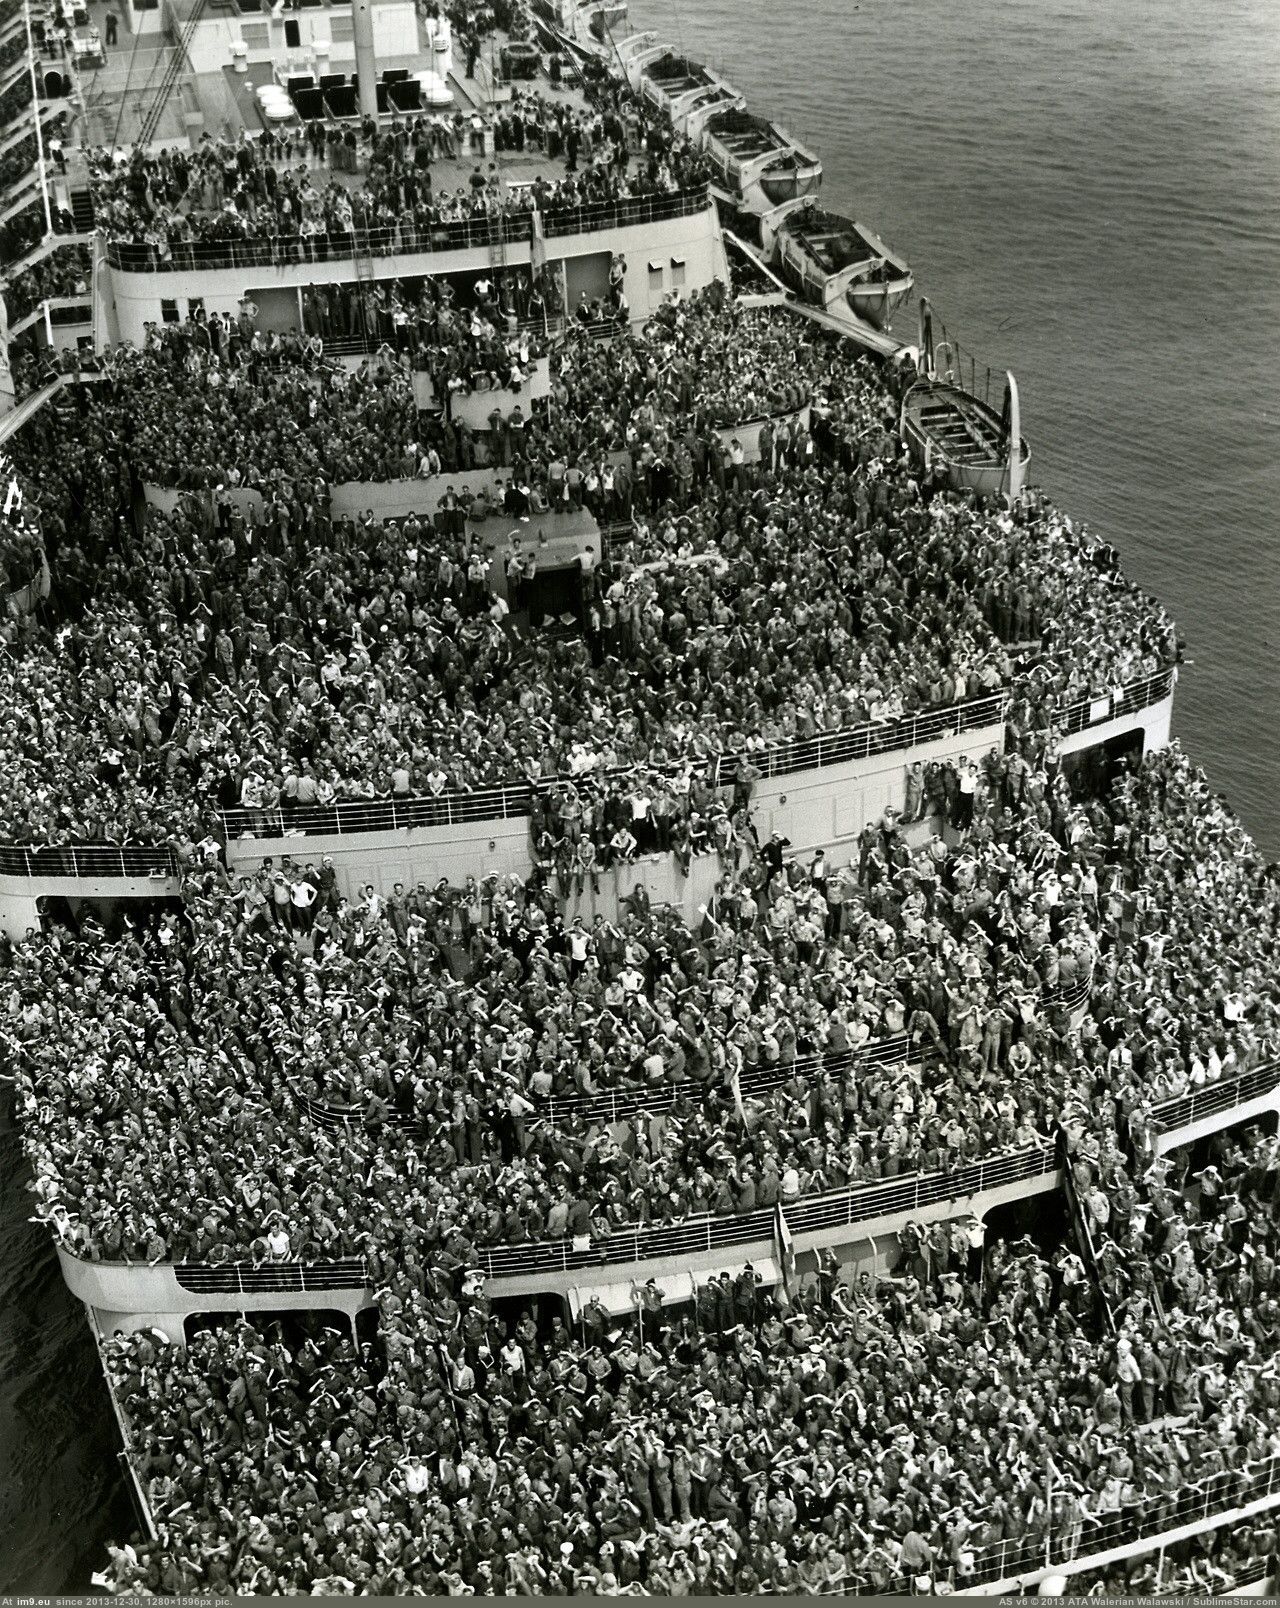 Soldiers returning from Europe in WW2, 1945